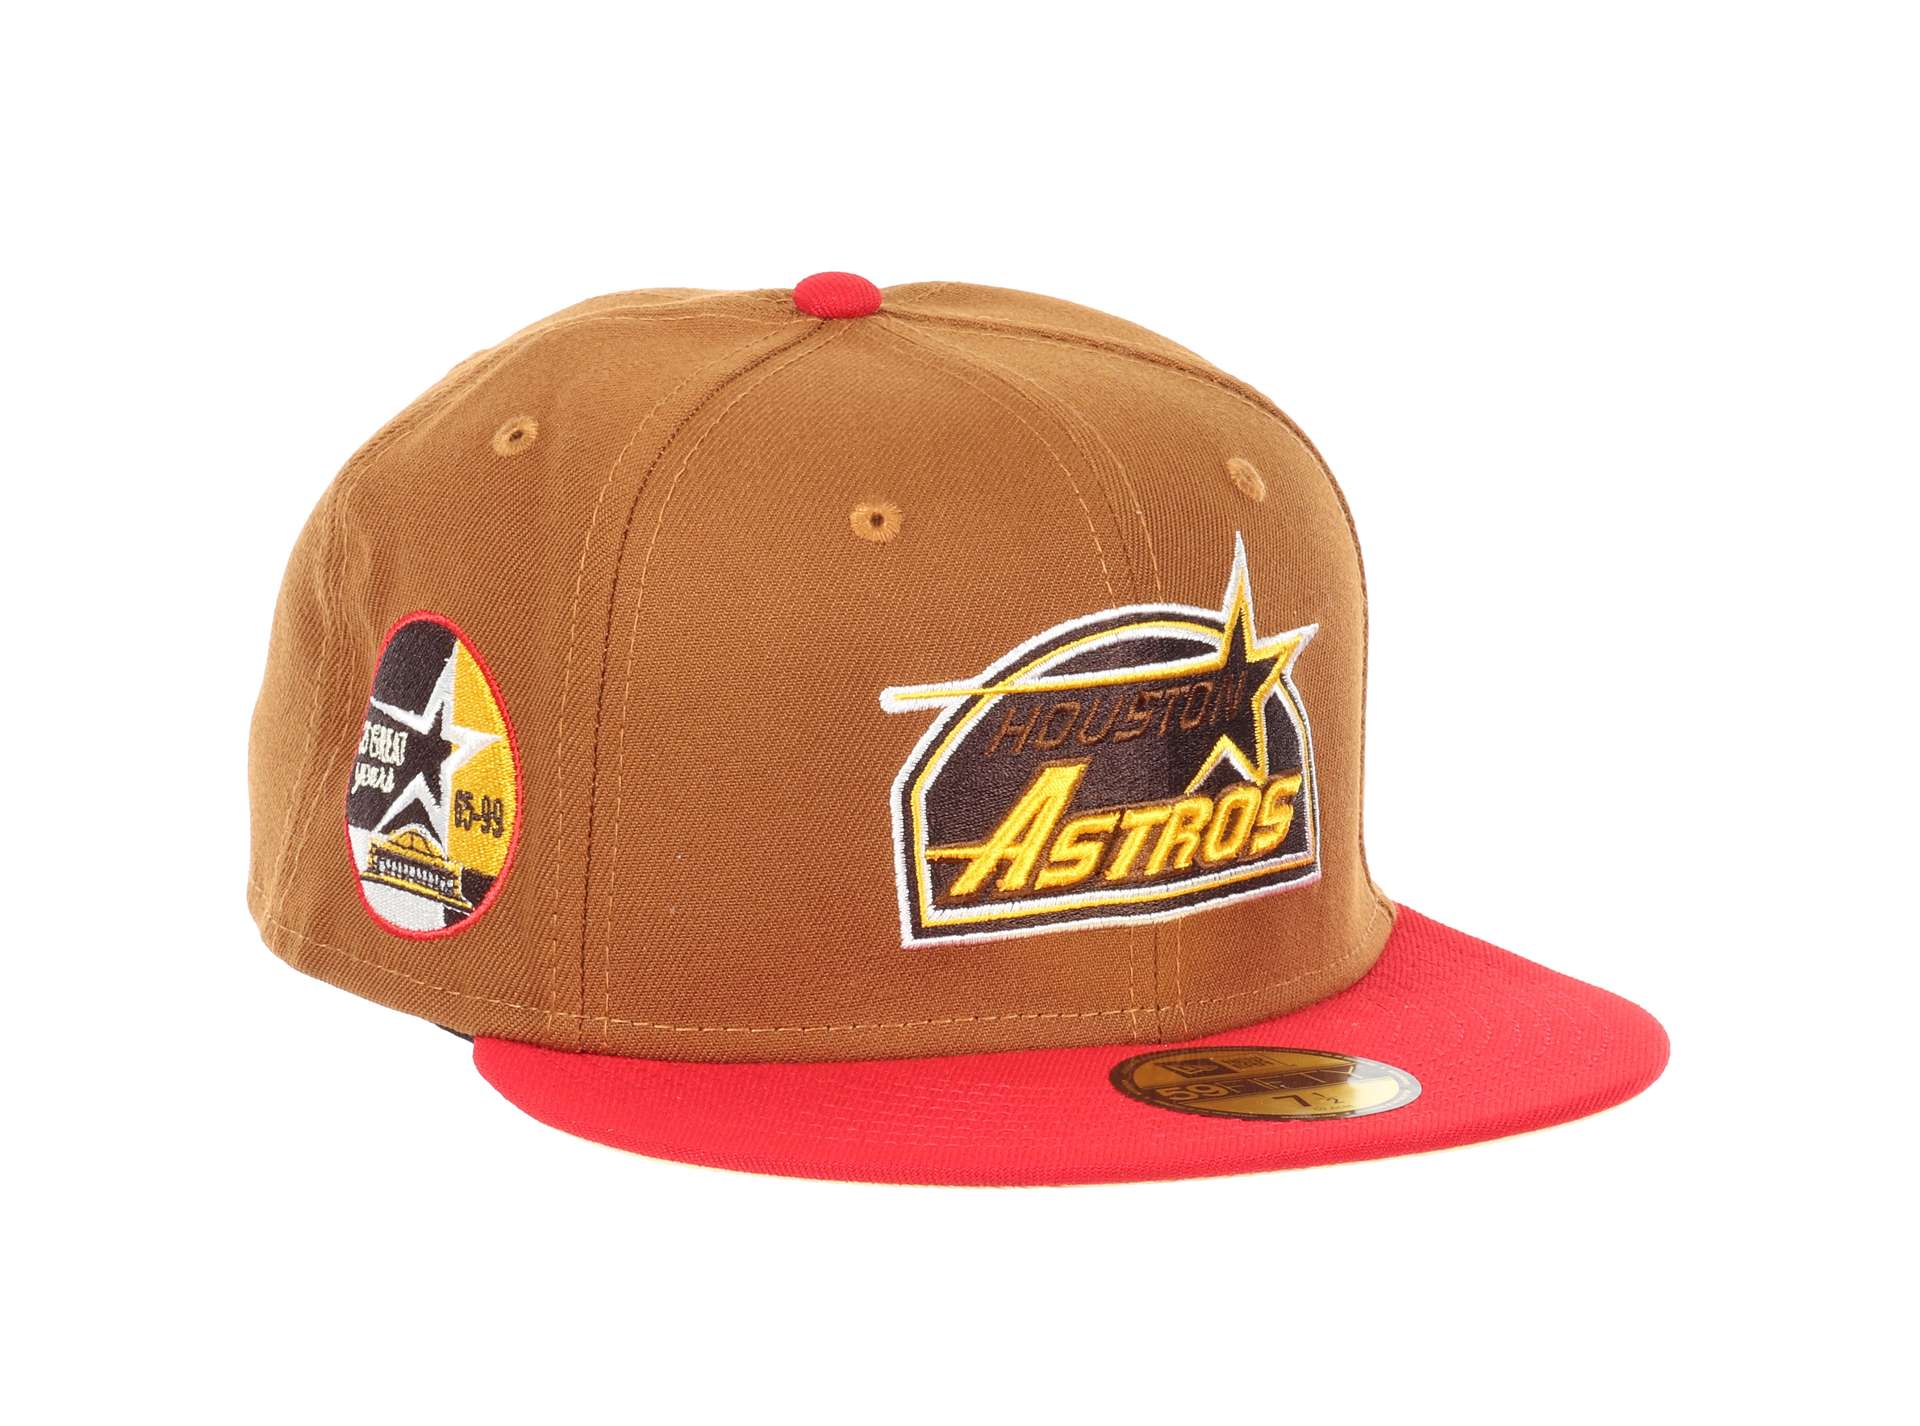 Houston Astros 35 Great Years Sidepatch Peanut 59Fifty Basecap New Era